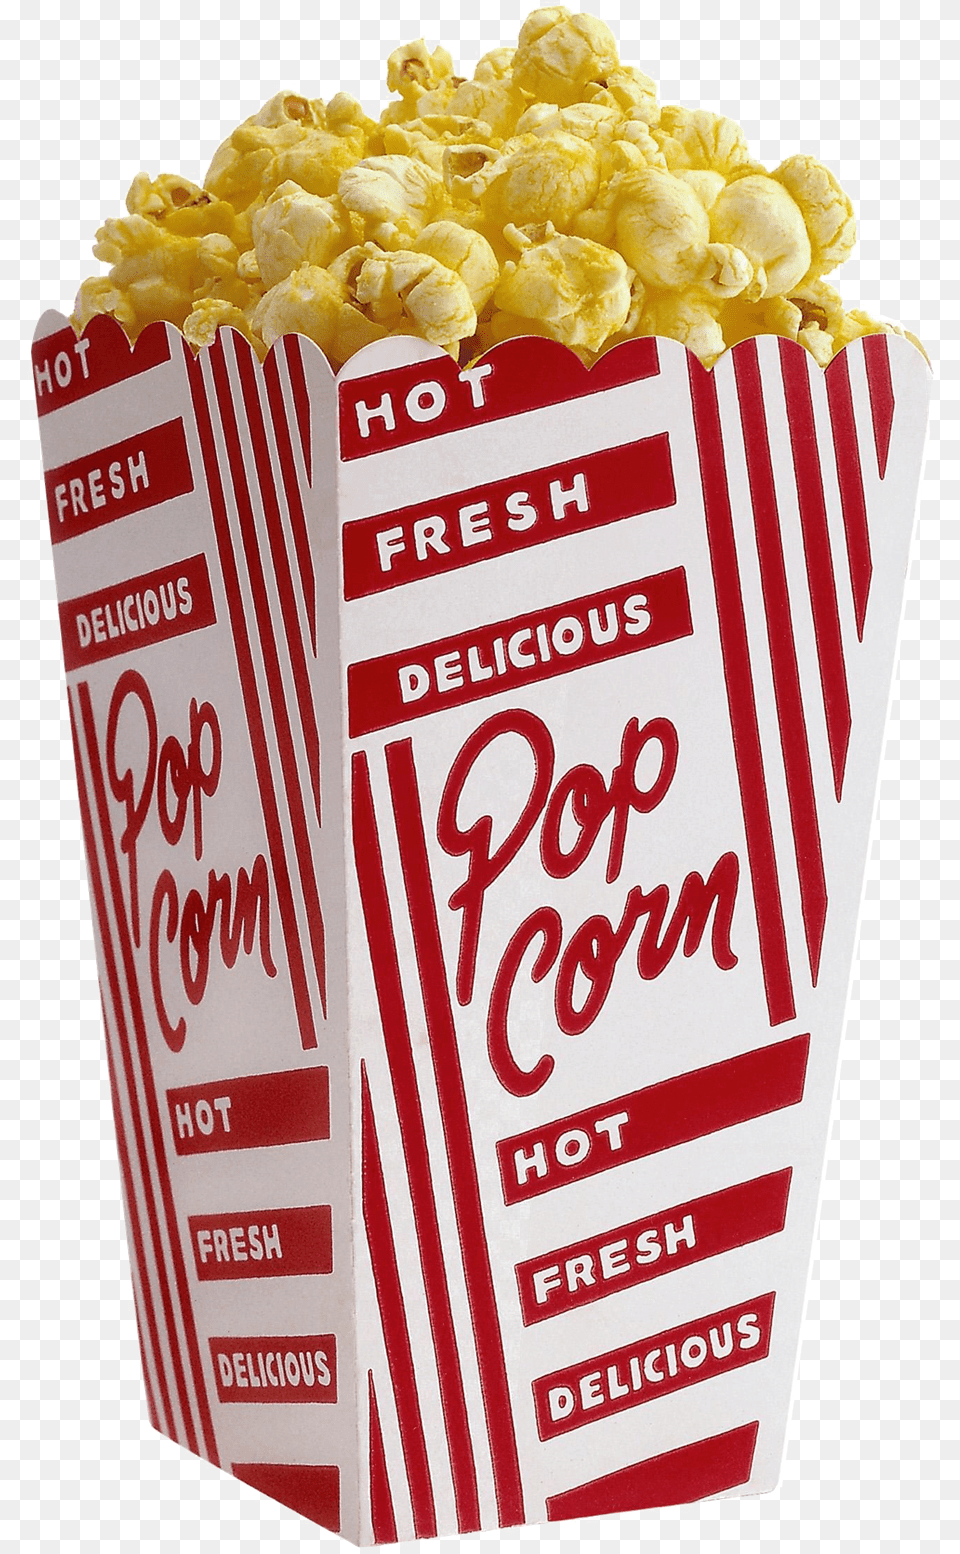 Hot Fresh Delicious Popcorn, Food, Snack Png